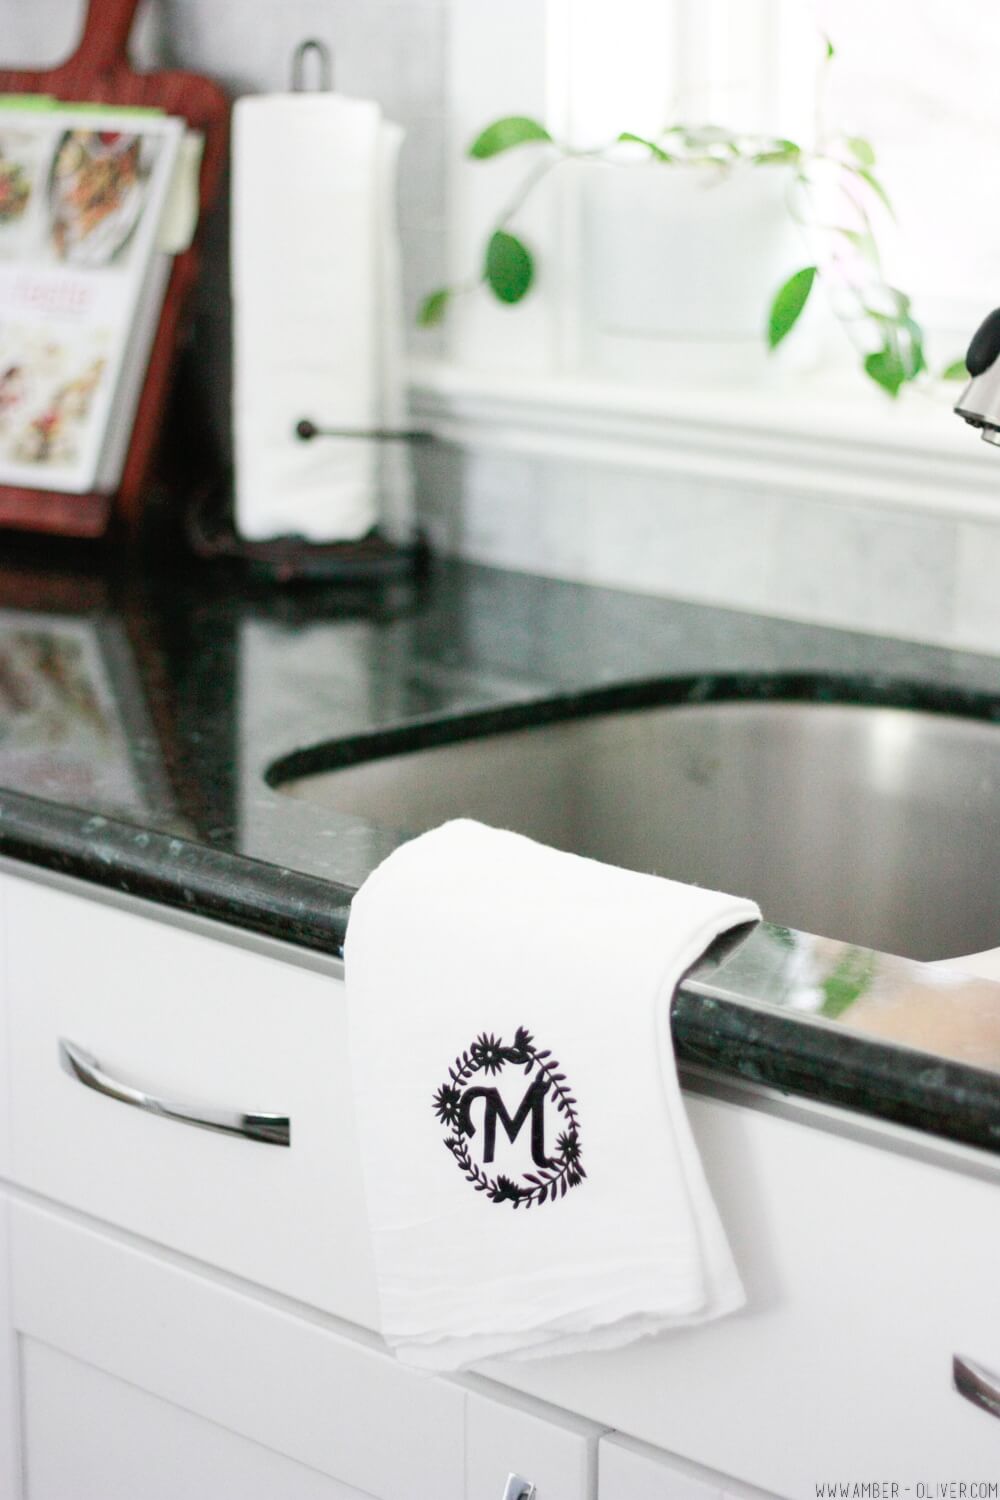 White handtowel hanging over a black sink and counter top with a monogram in black vinyl.